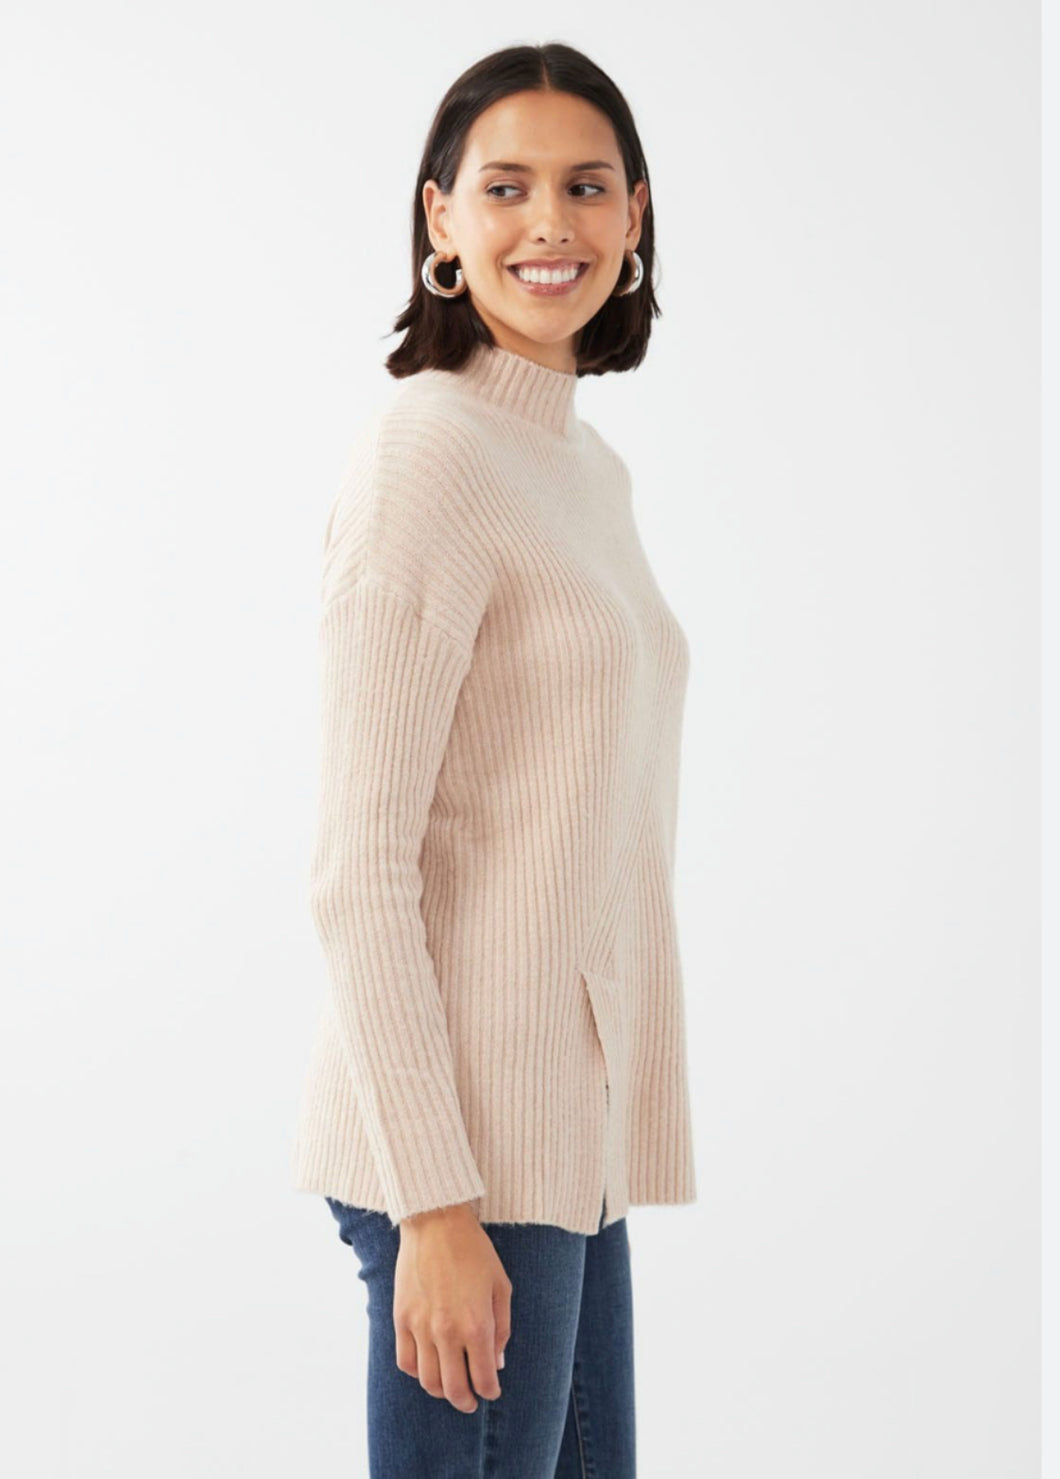 French Dressing Jeans: Mock Neck Tunic Sweater in Light Tan